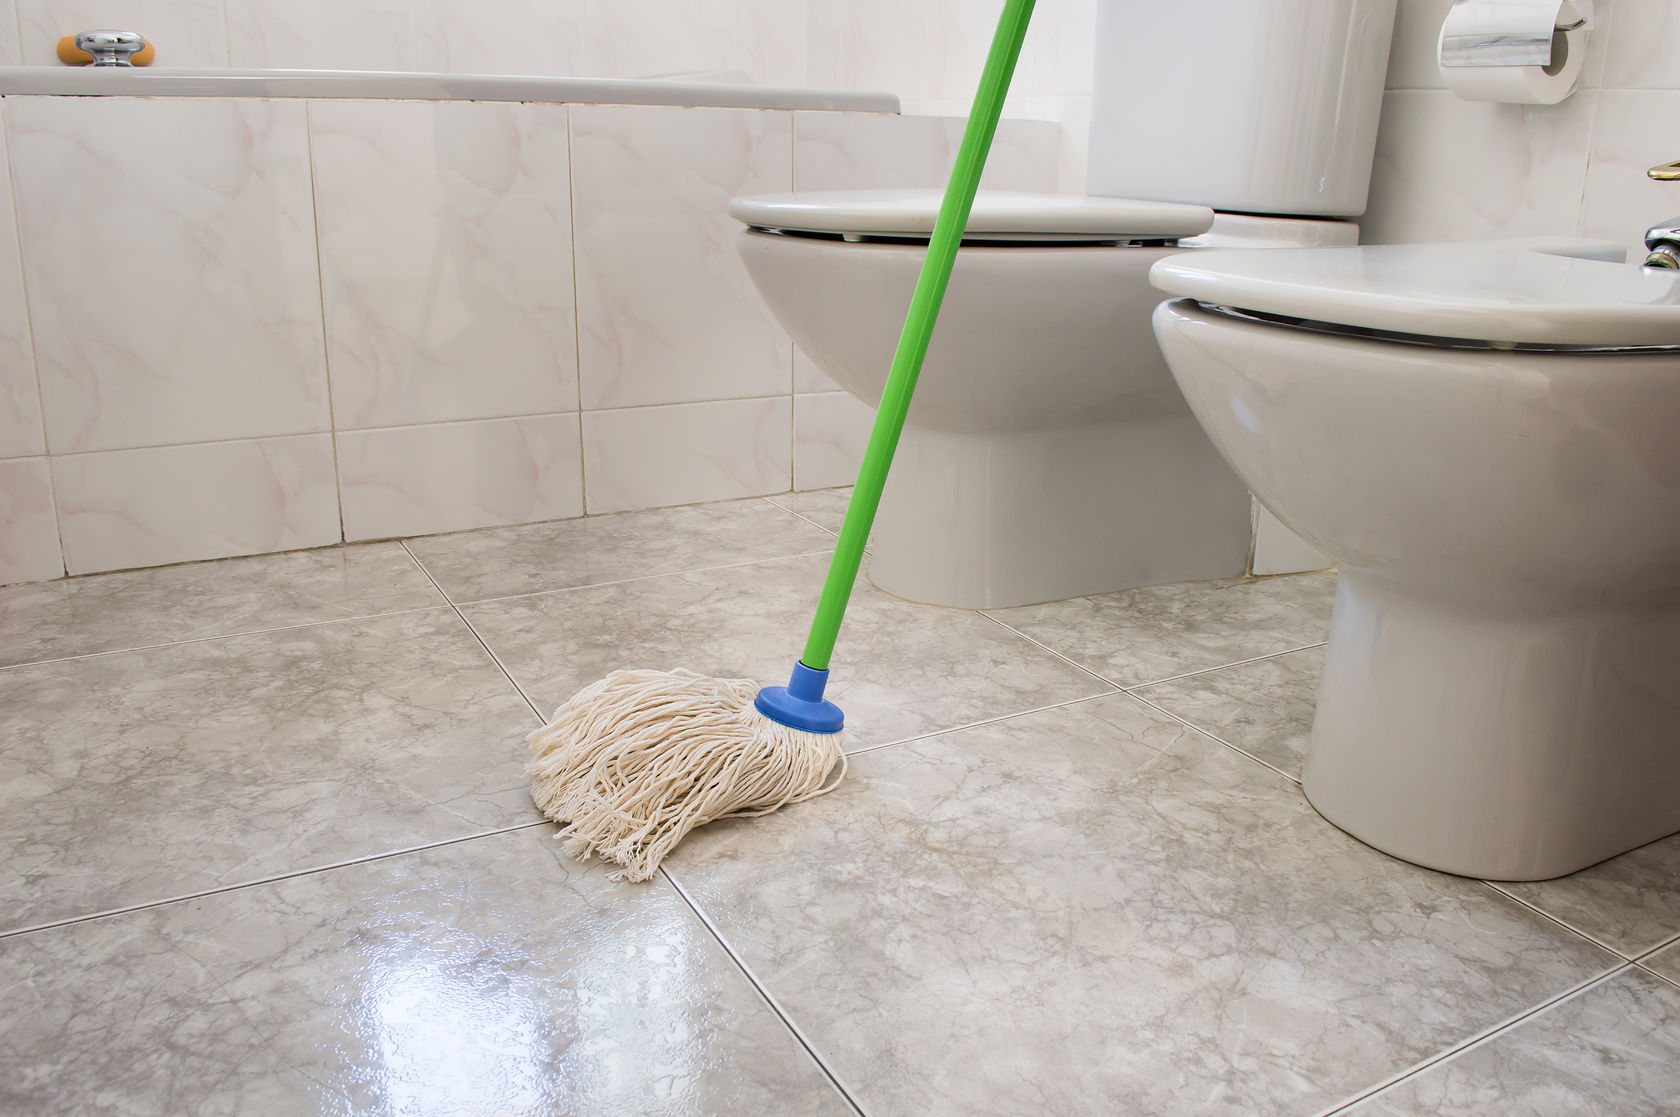 Cleaning your bathroom